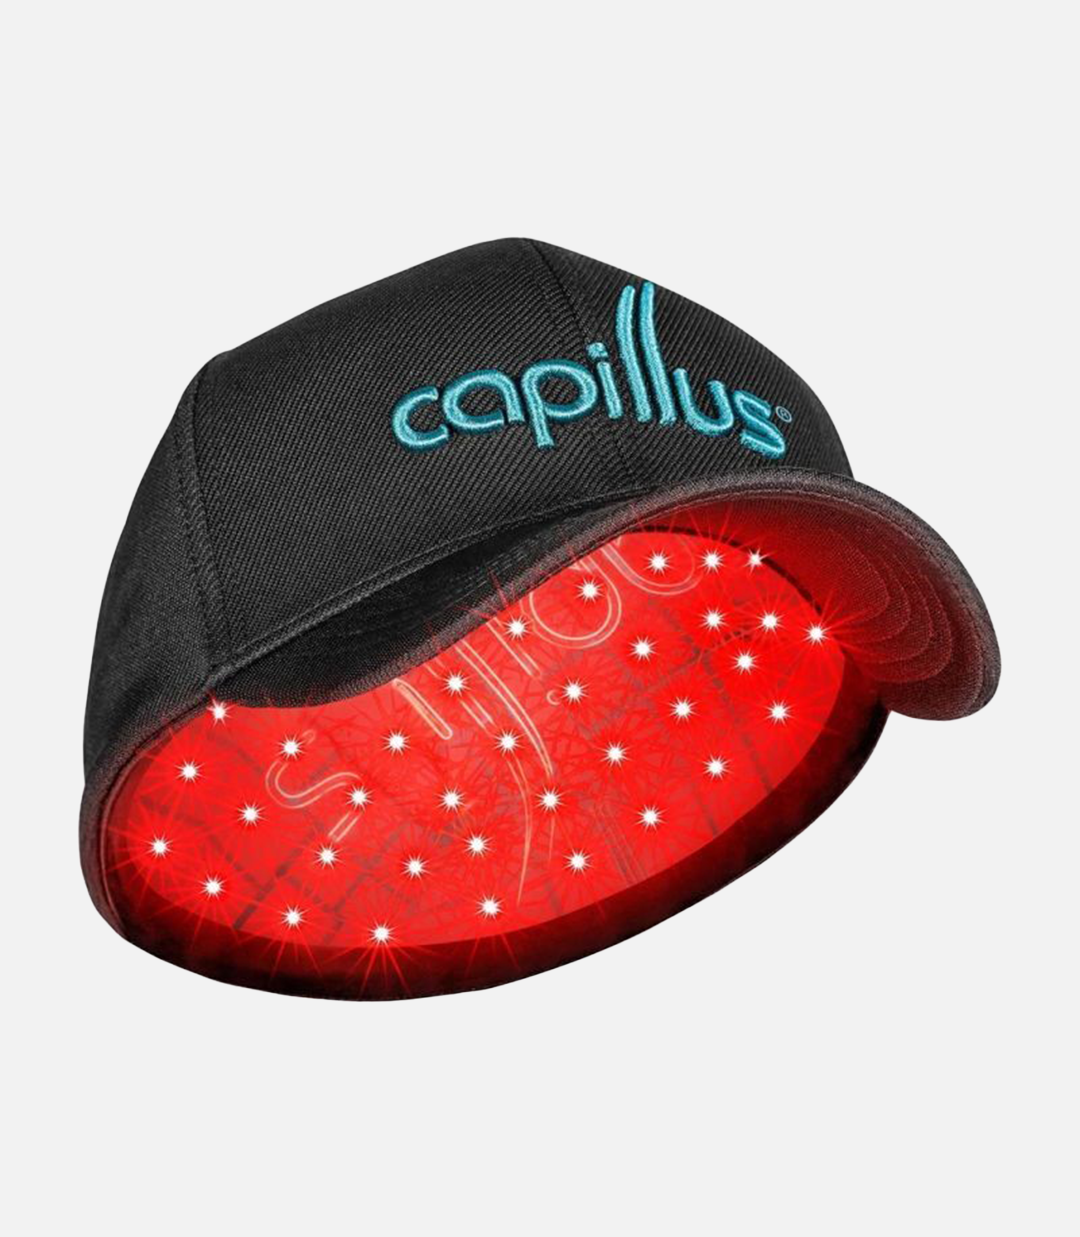 Capillus X+ Laser Hair Regrowth Therapy Cap｜レーザーキャップ